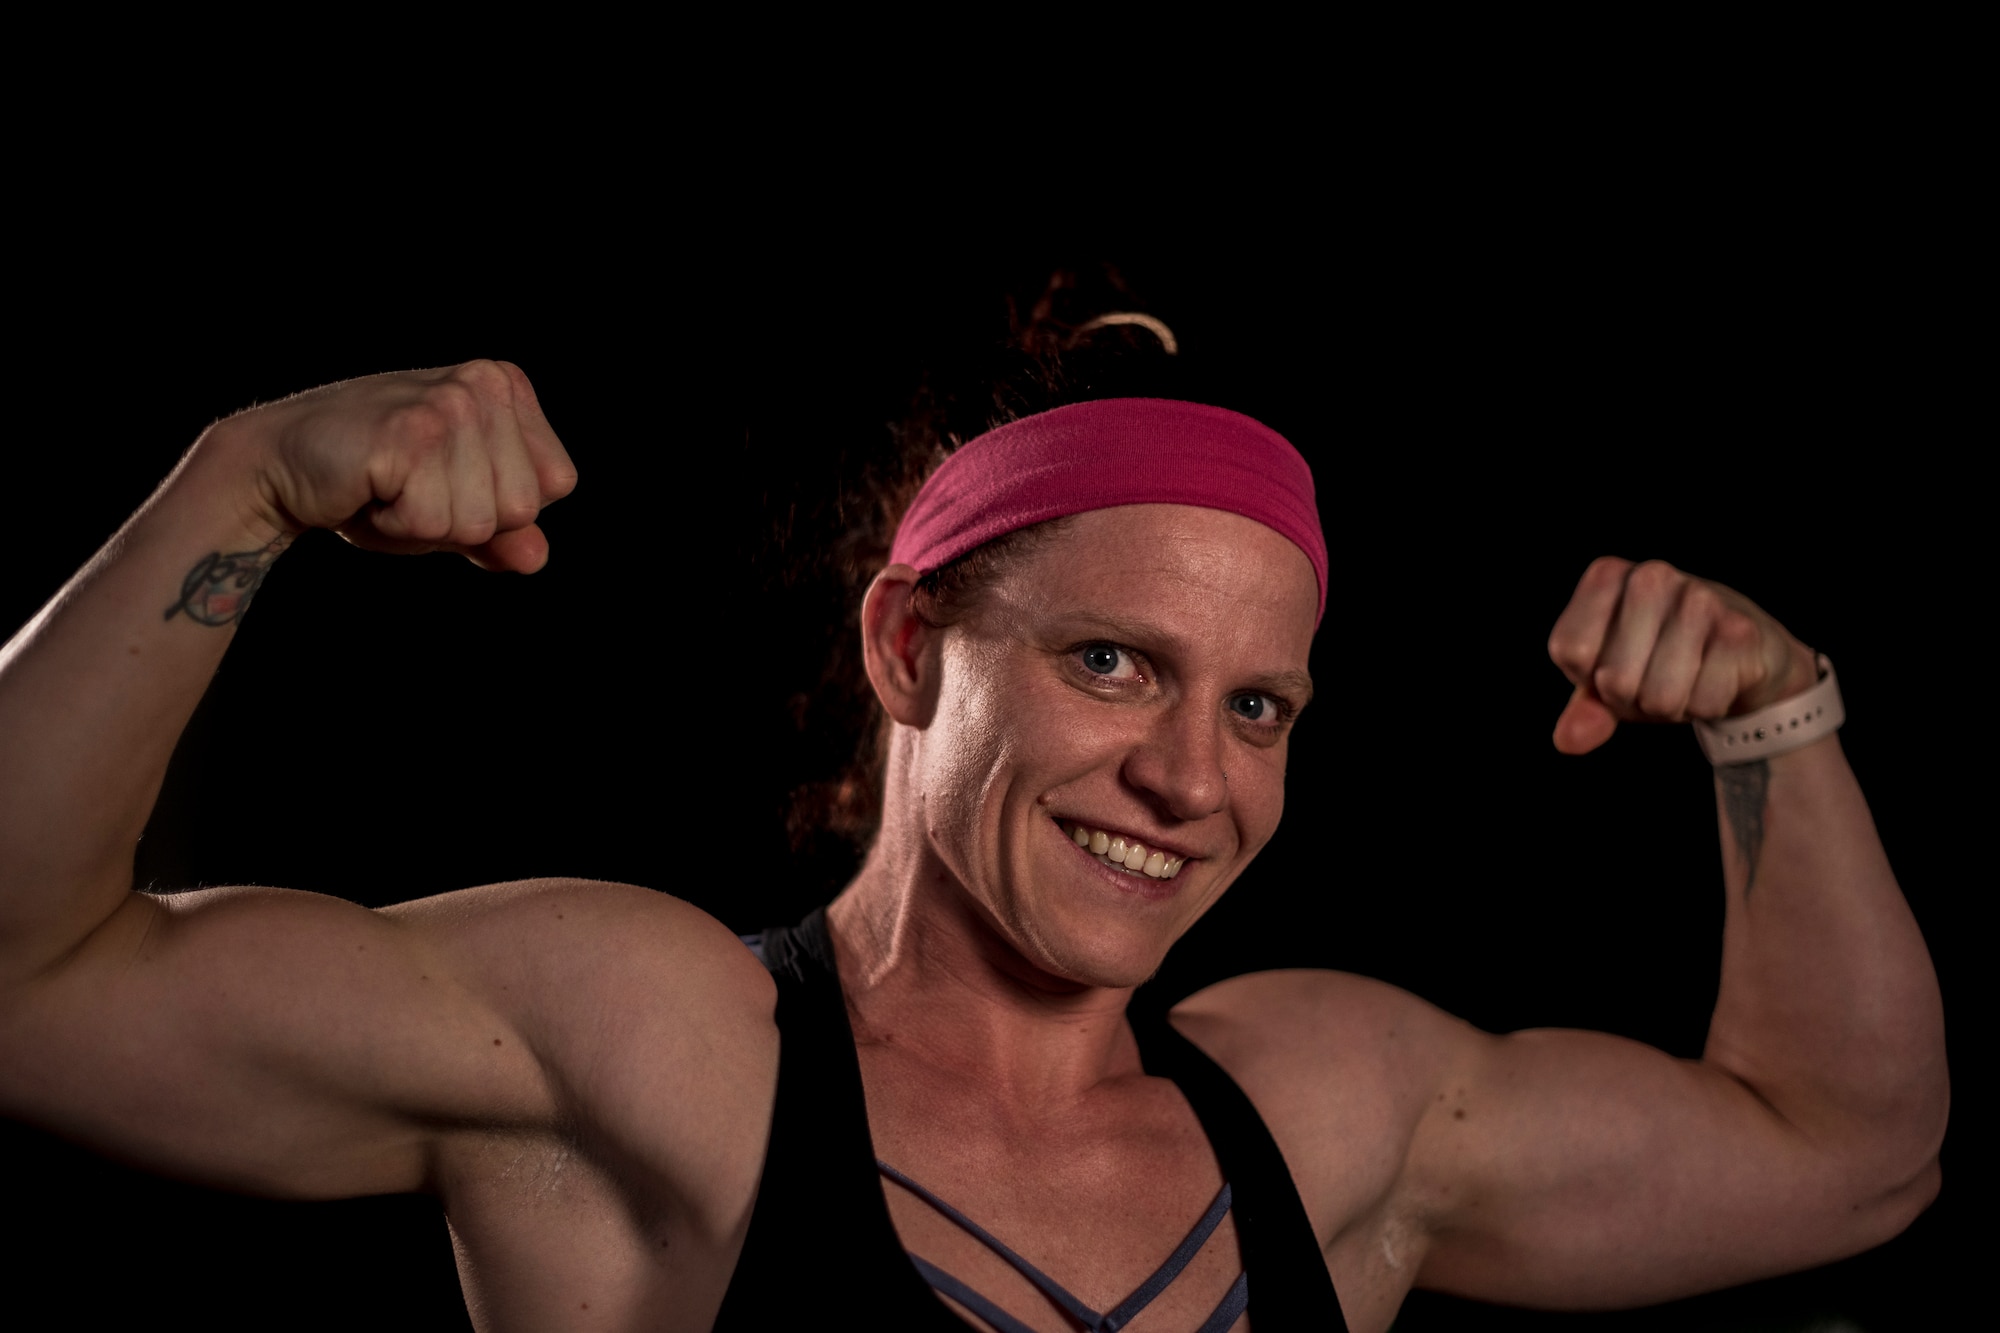 A woman wearing a work out top flexes her arms for the camera with a big smile on her face.